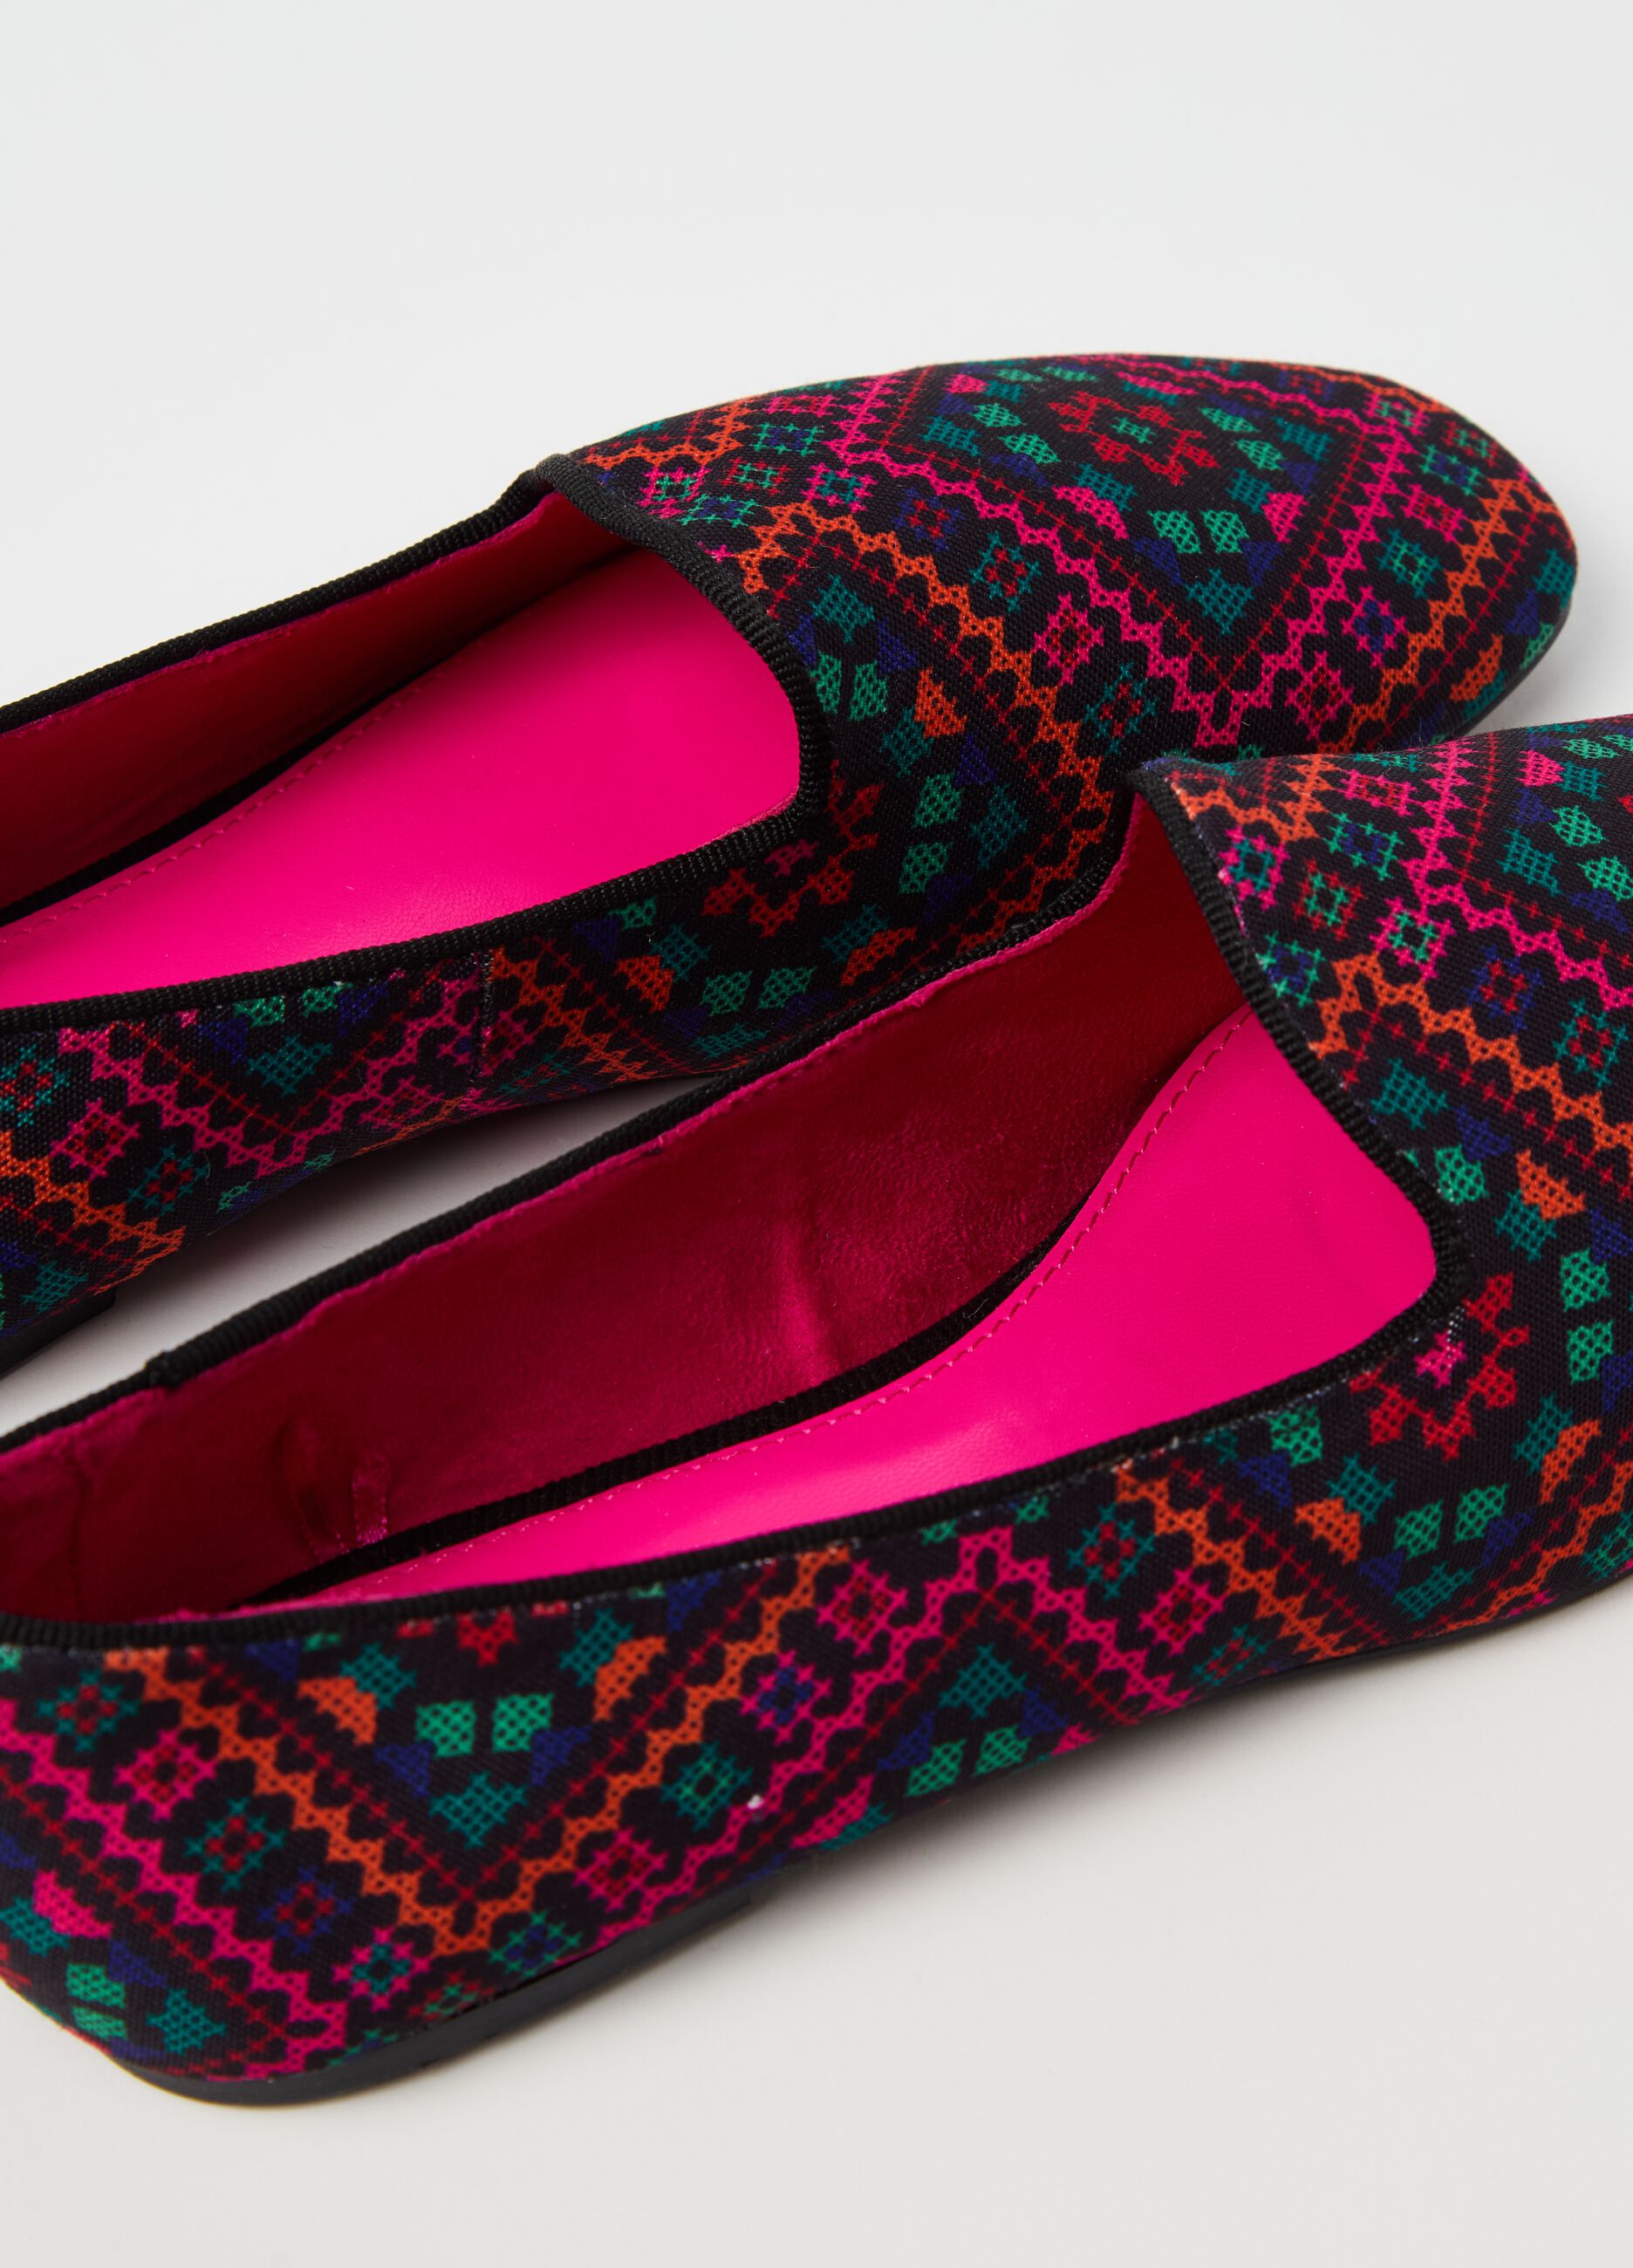 Slipper shoes with geometric pattern